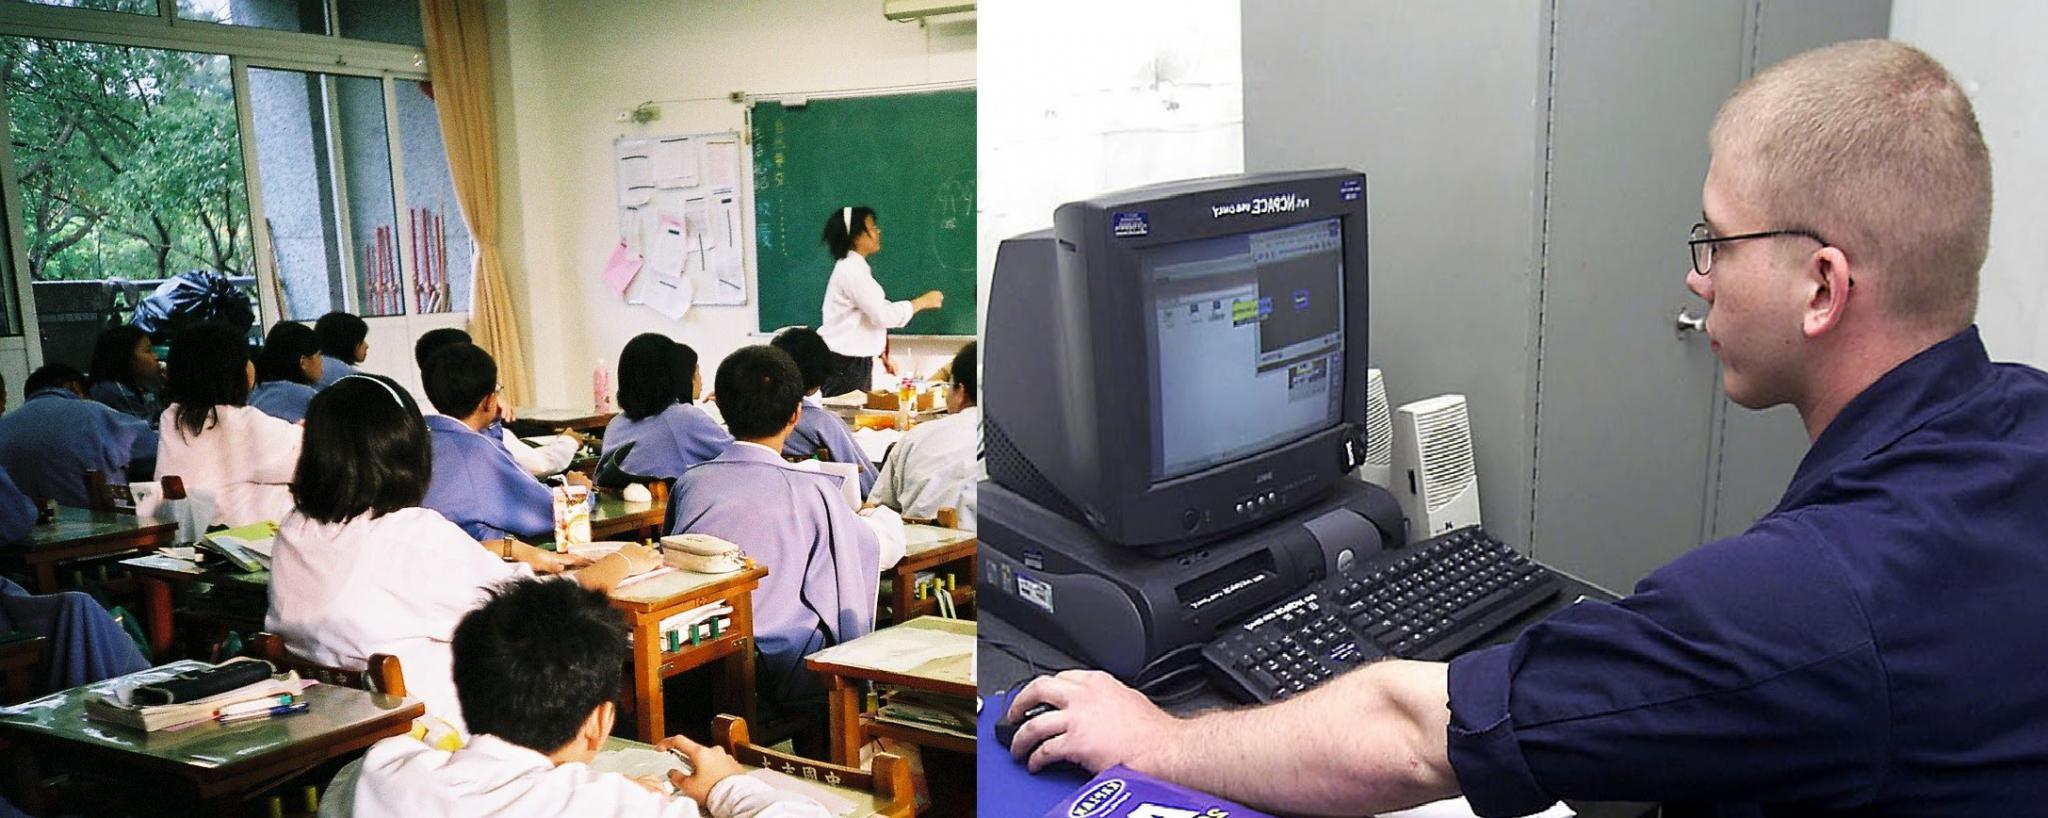 person teaching at a classroom and a person on a computer